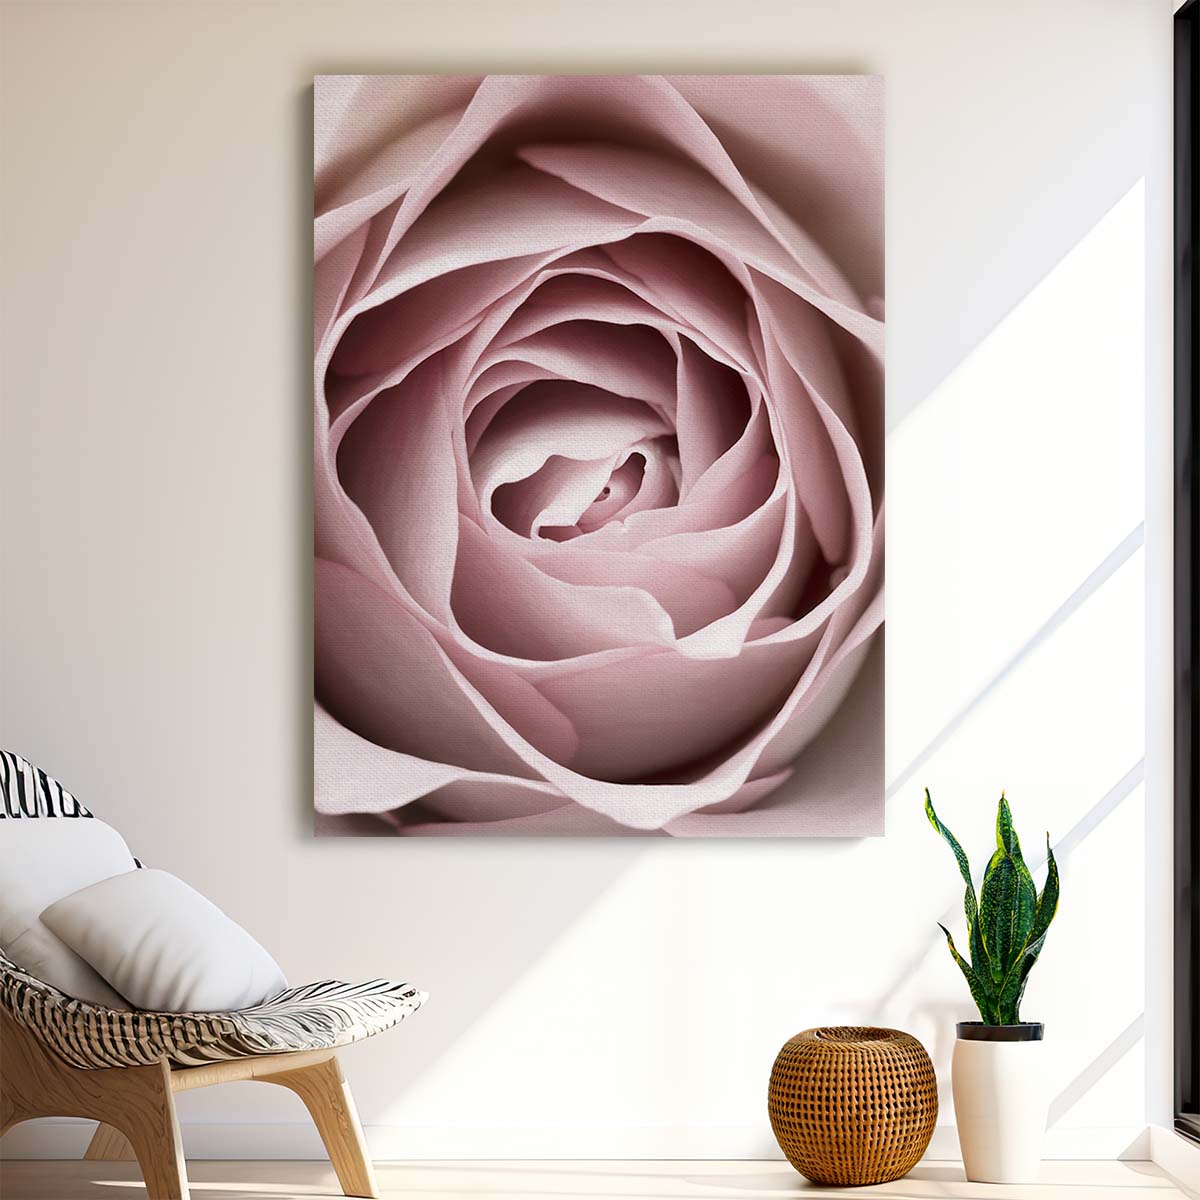 Botanical Photography 1XStudio's Up-close Pink Rose Flower Still Life by Luxuriance Designs, made in USA